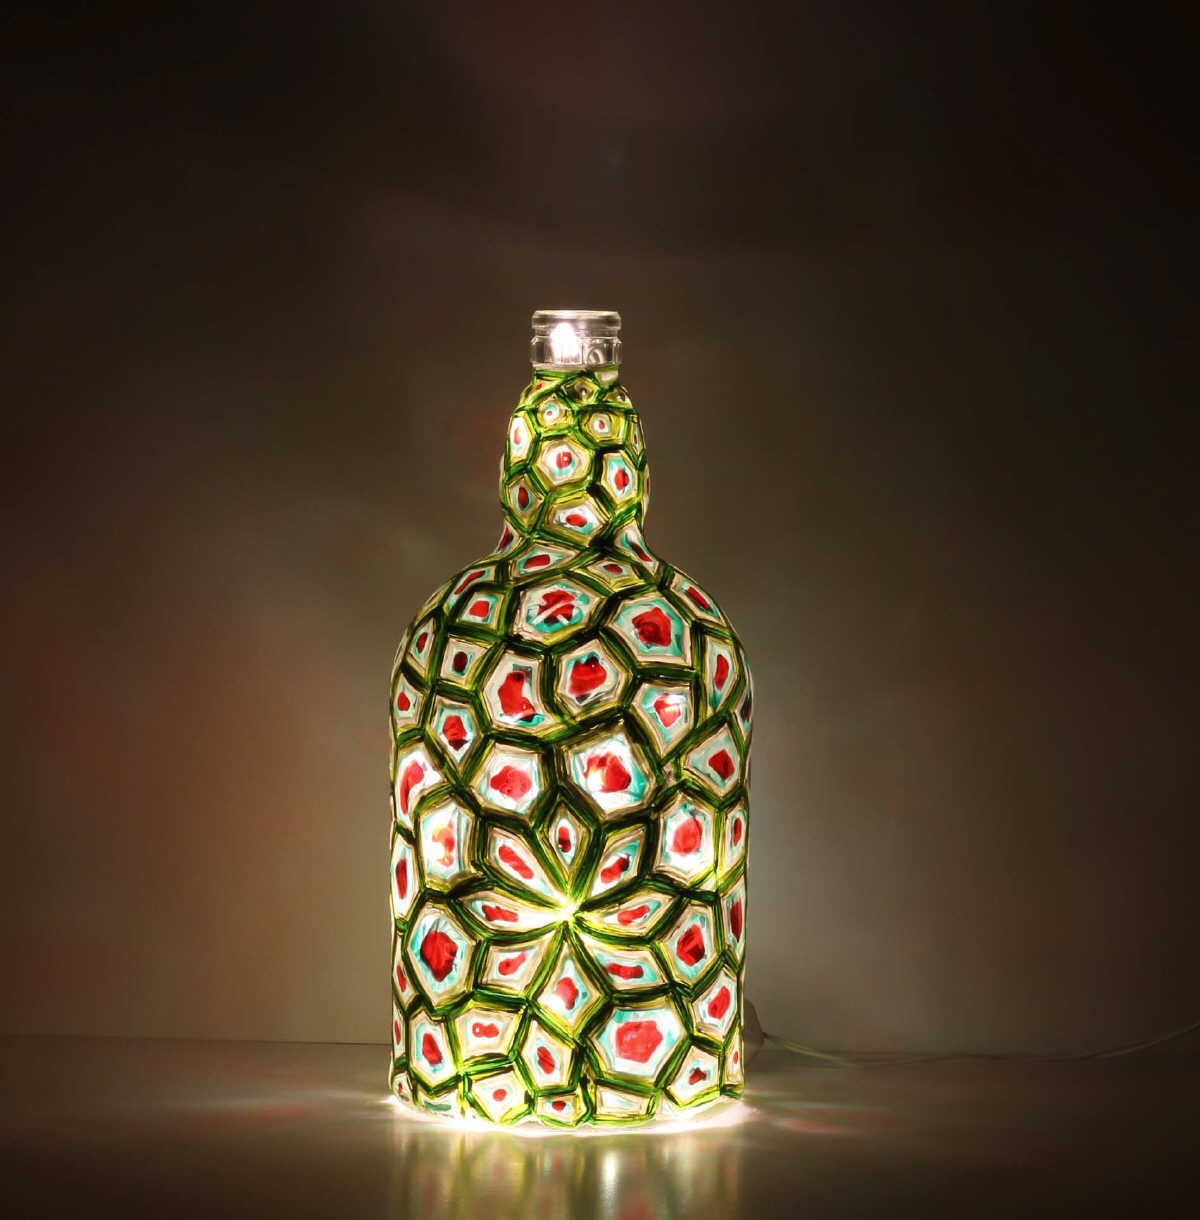 Hand Painted Light Bottle - Green and Red | imagicArt